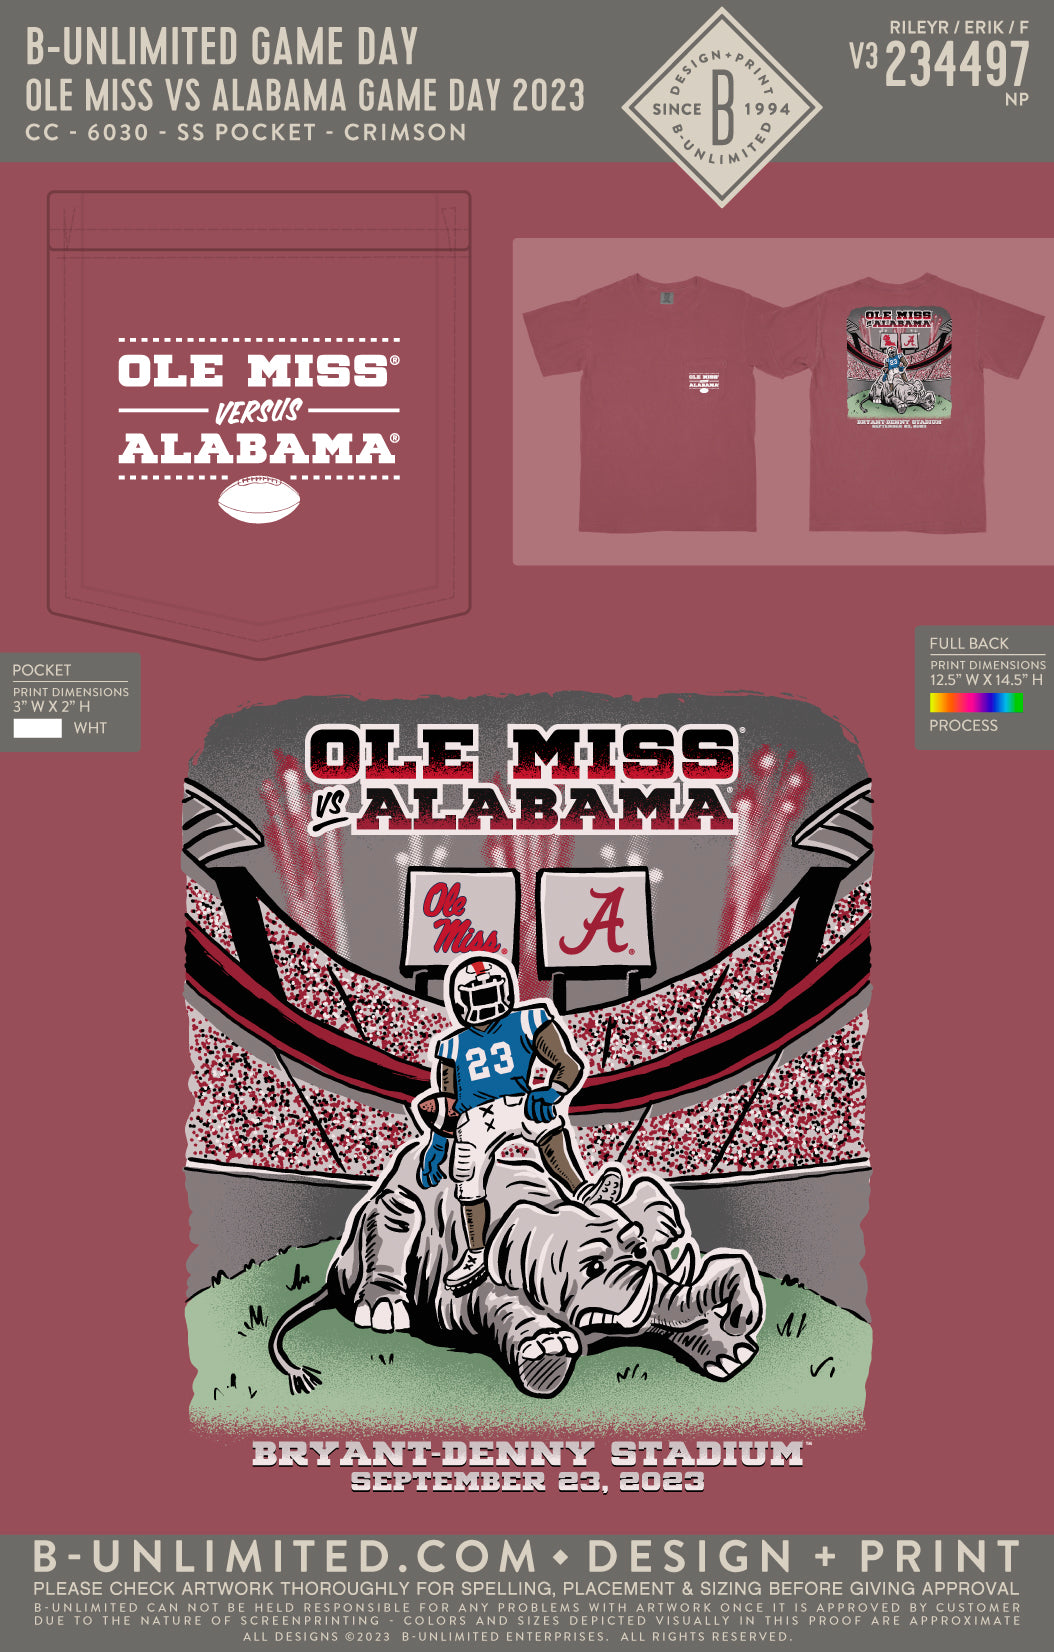 B-Unlimited Game Day - Ole Miss vs Alabama Game Day 2023 